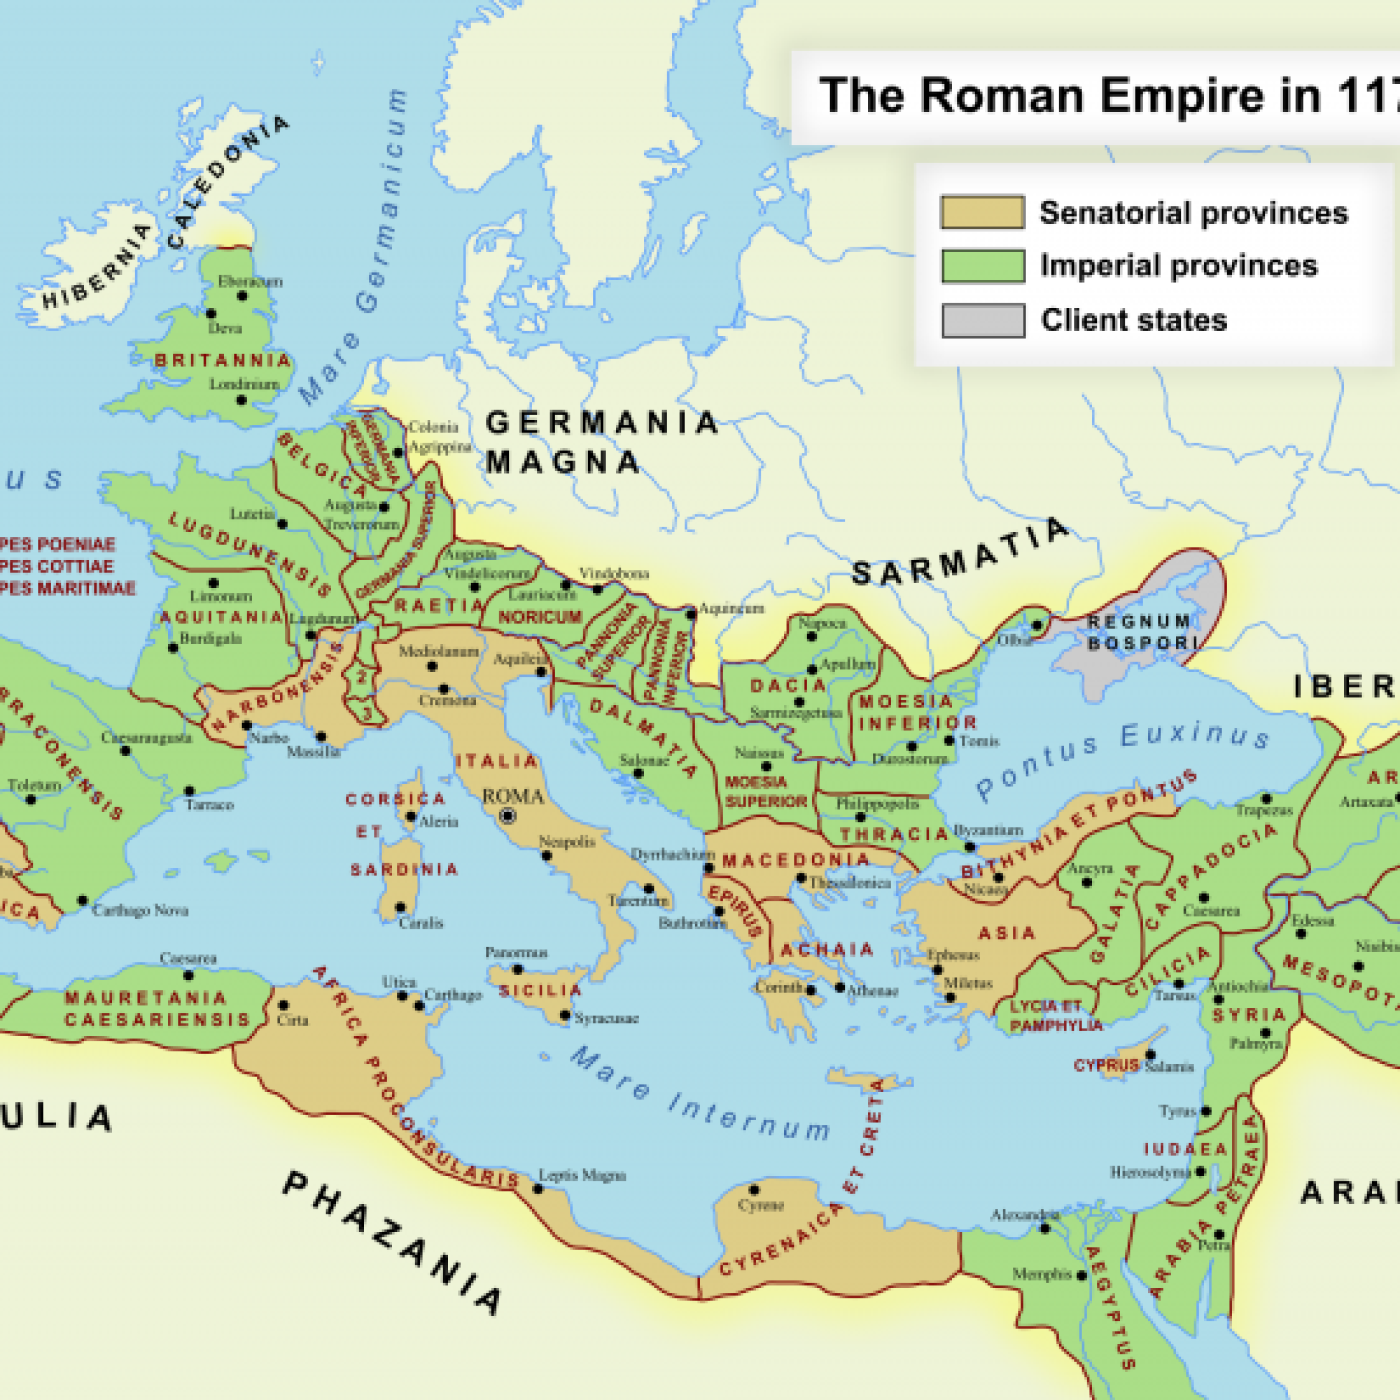 Roman Empire Free download the new version for ios